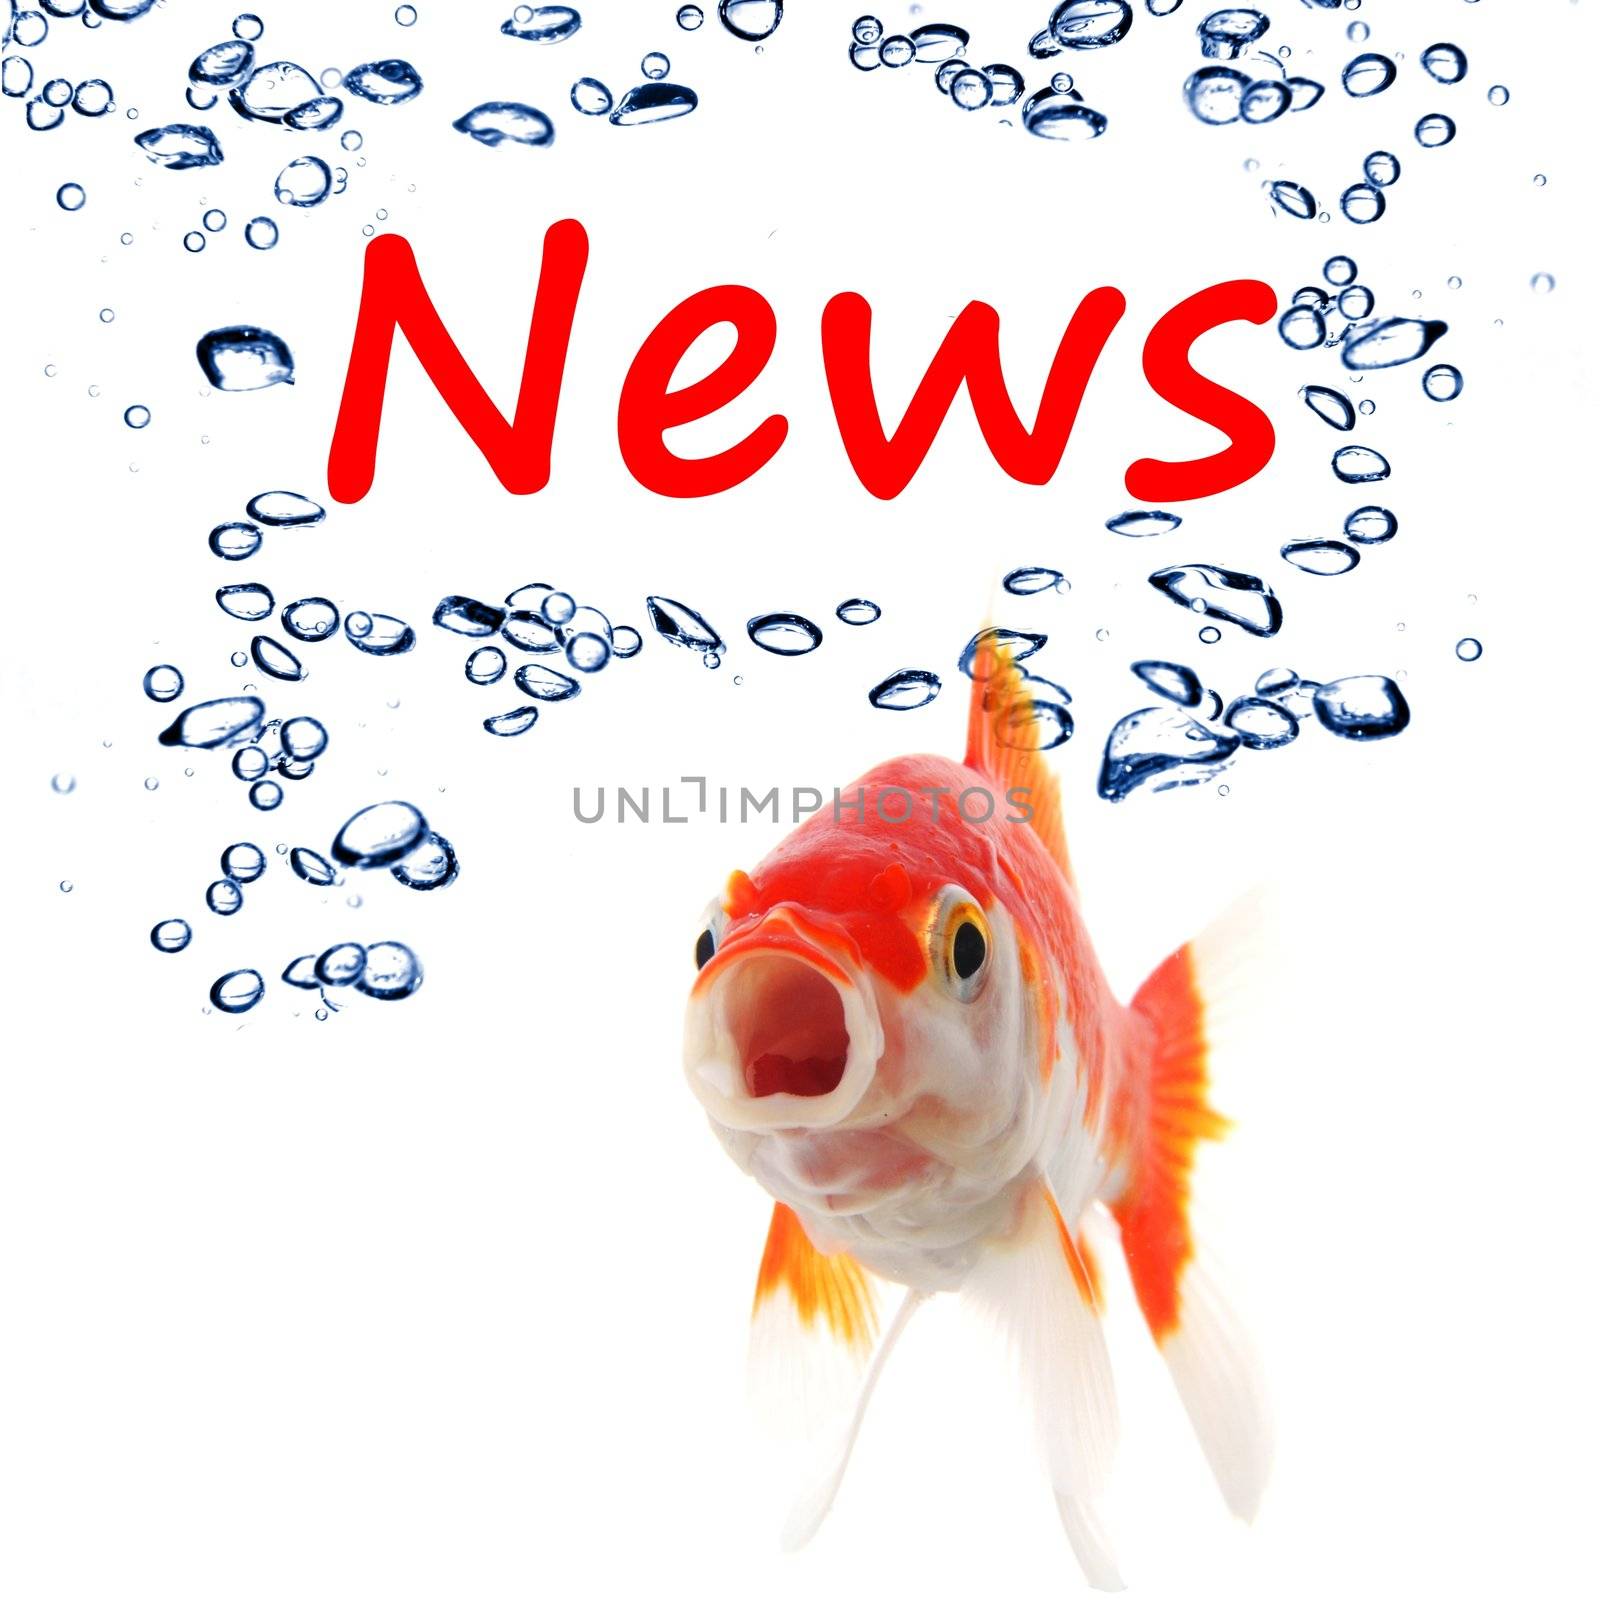 news or newsletter concept with word and goldfish on white background